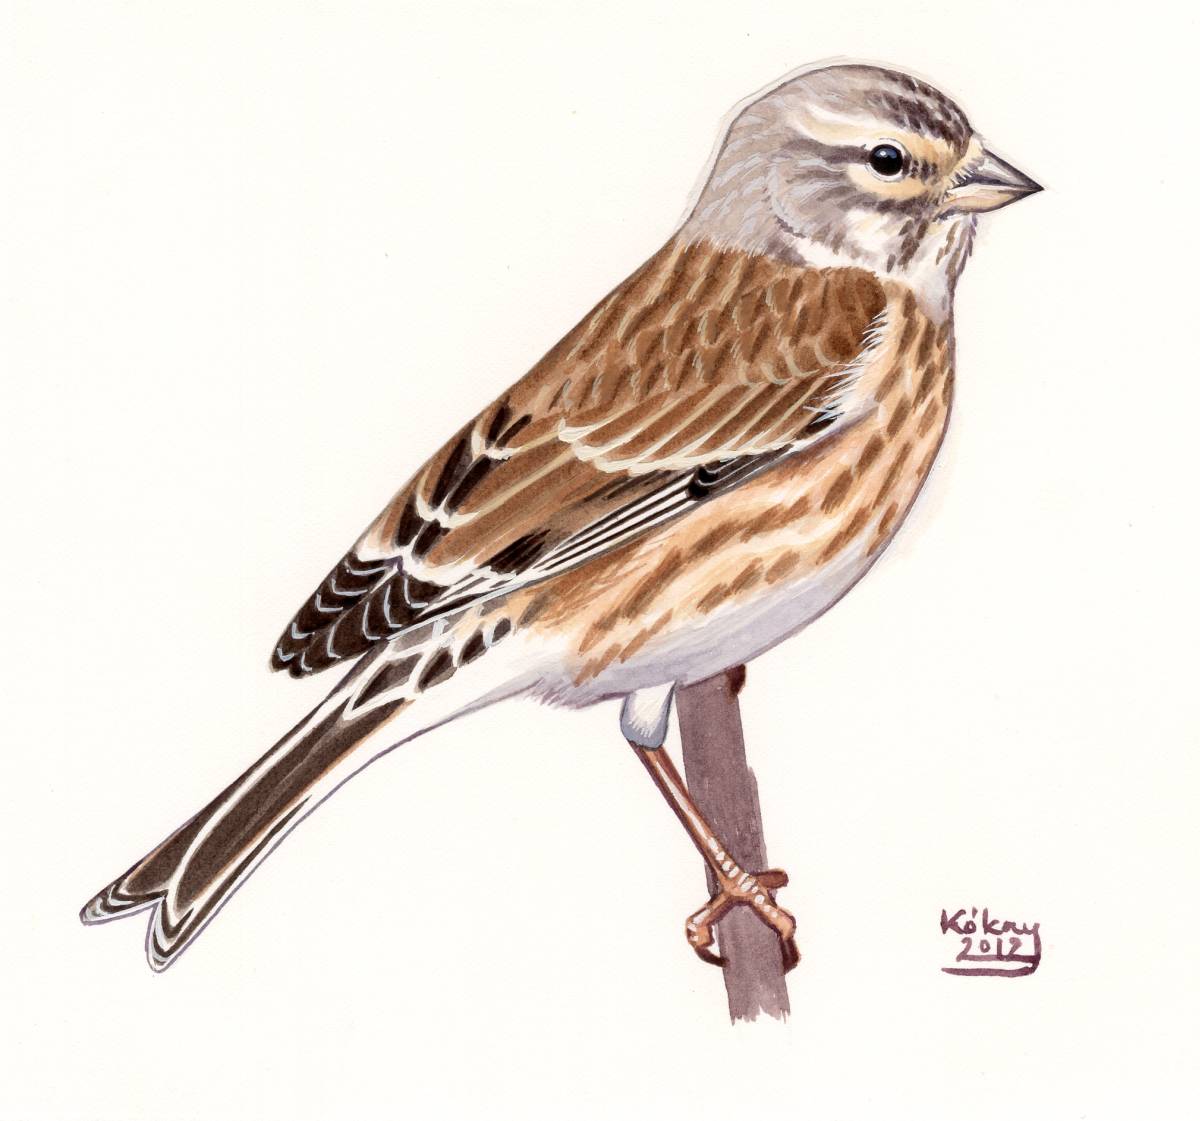 Female Linnet (Carduelis cannabina), watercolour and bodycolour on paper